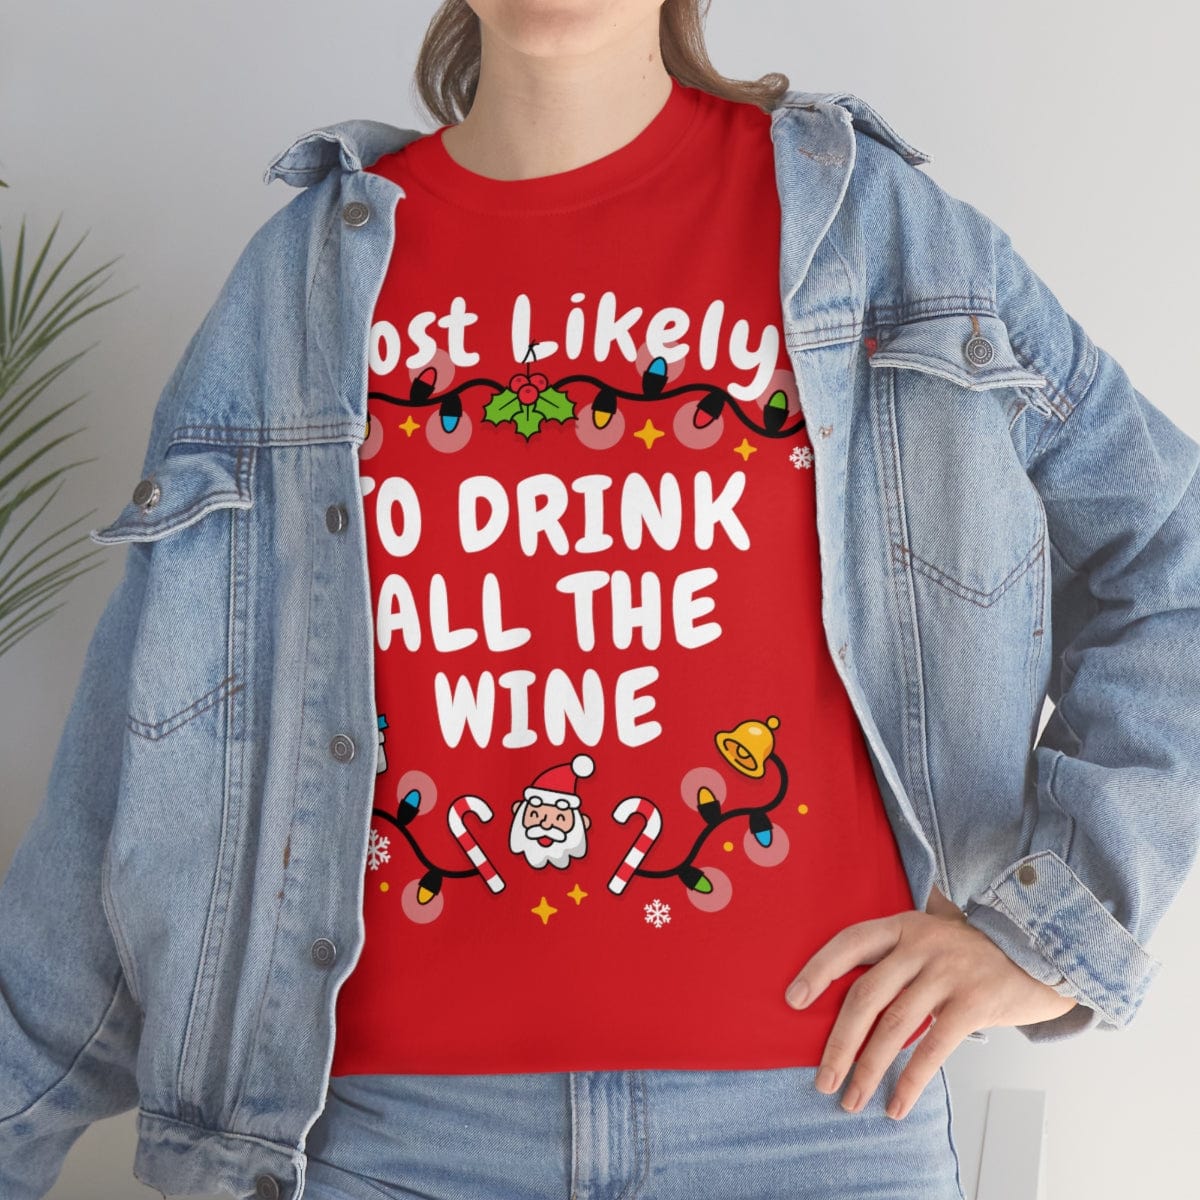 TO DRINK ALL THE WINE